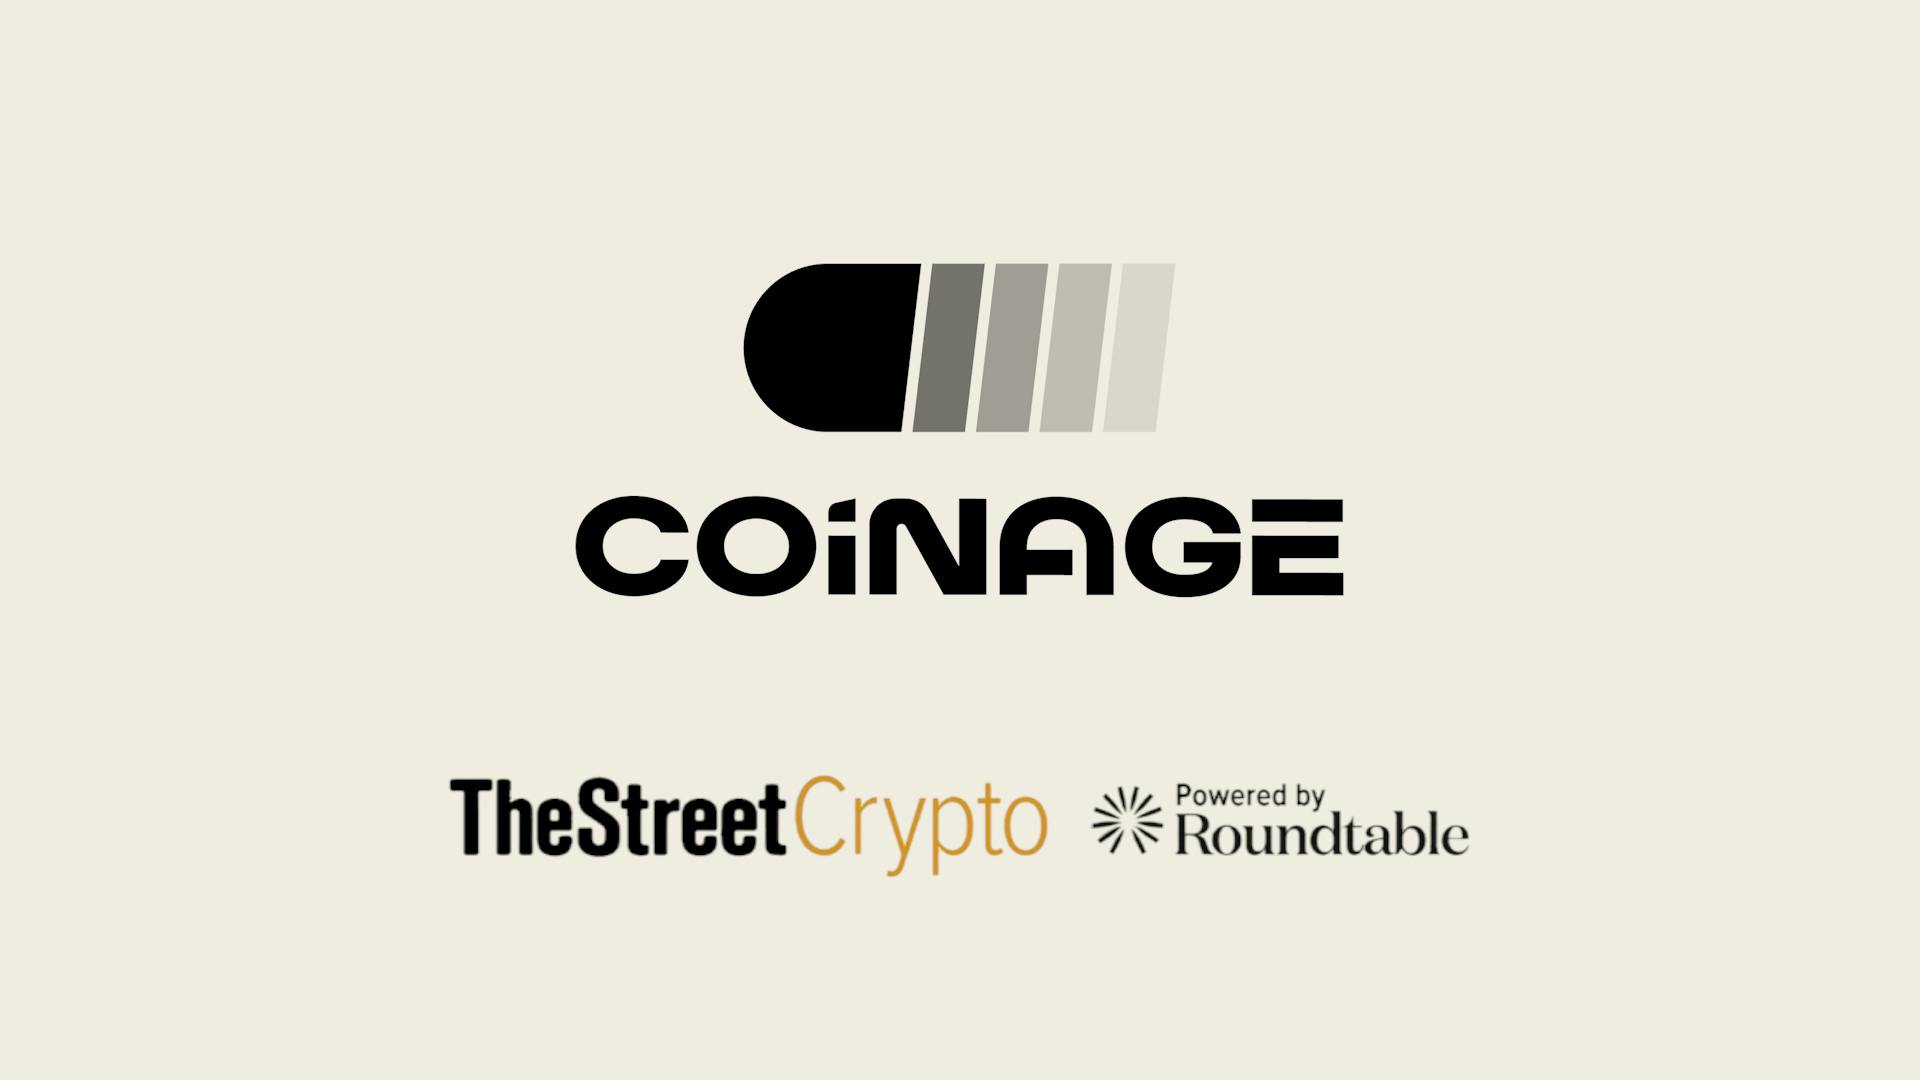 Coinage and TheStreetCrypto announced a new partnership to increase access to quality crypto content.